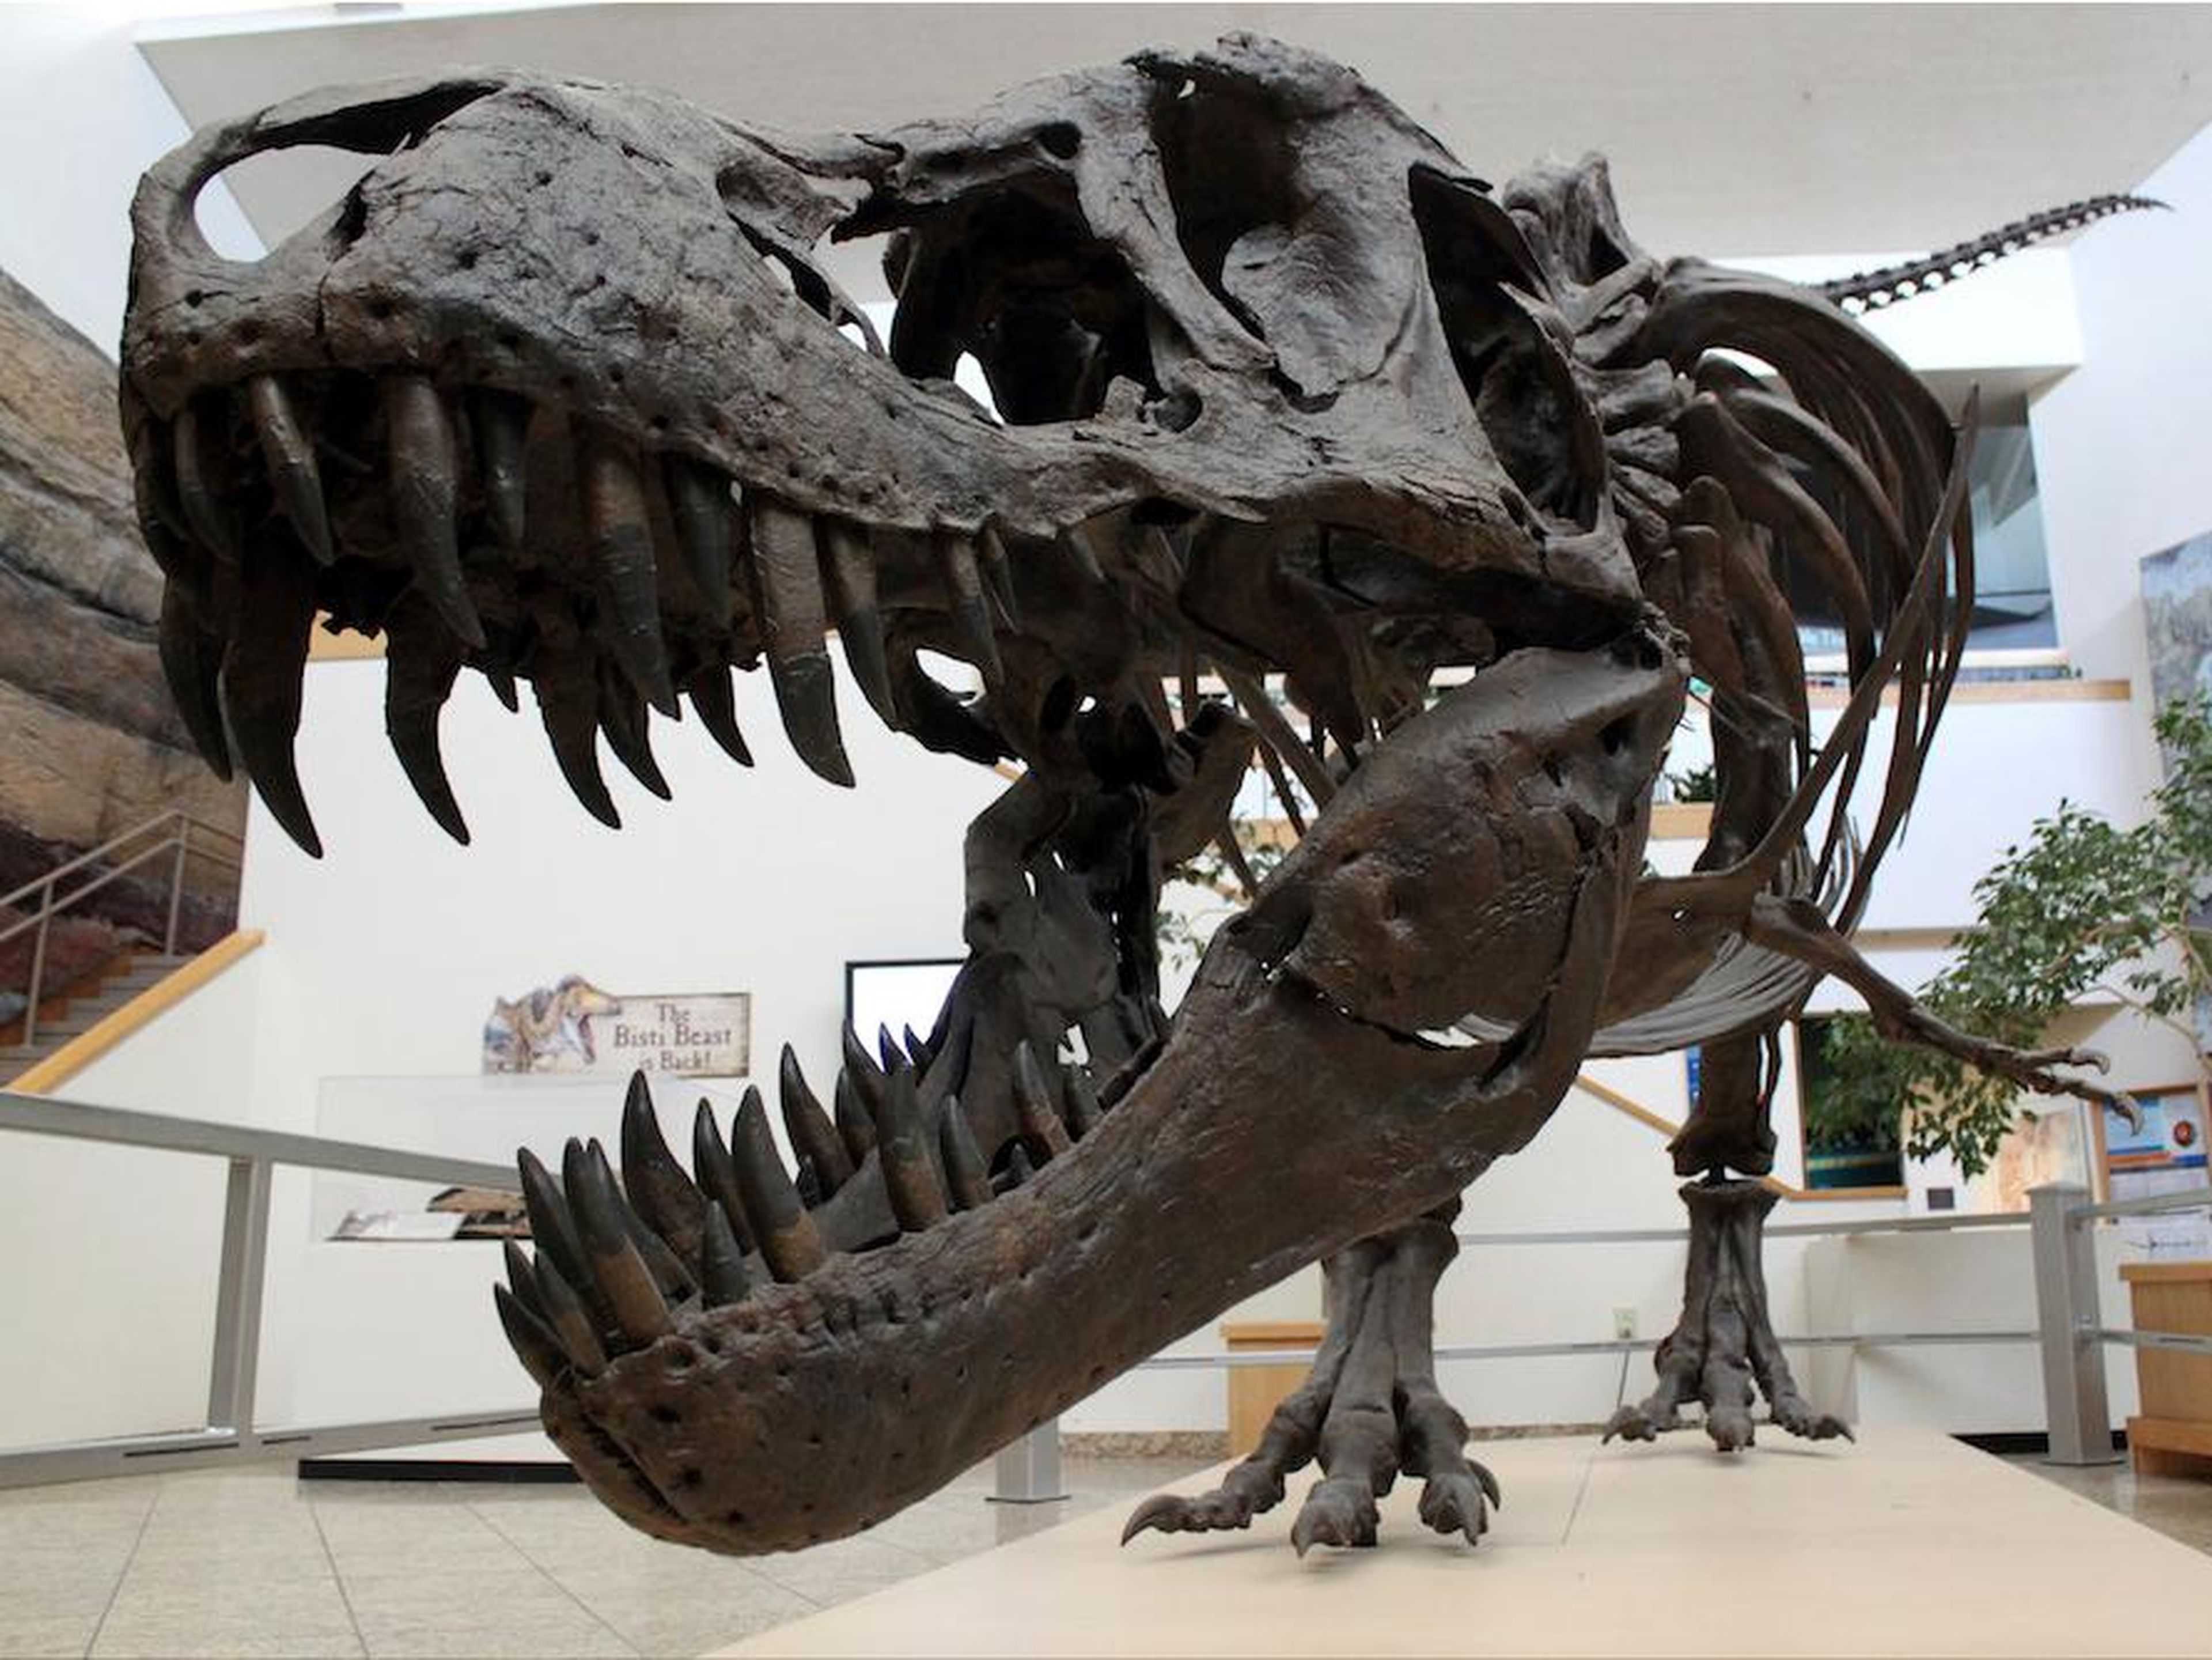 One of the biggest differences between the museum's depiction of T. rex and the images in popular culture is that the real animal appears to be much svelter.